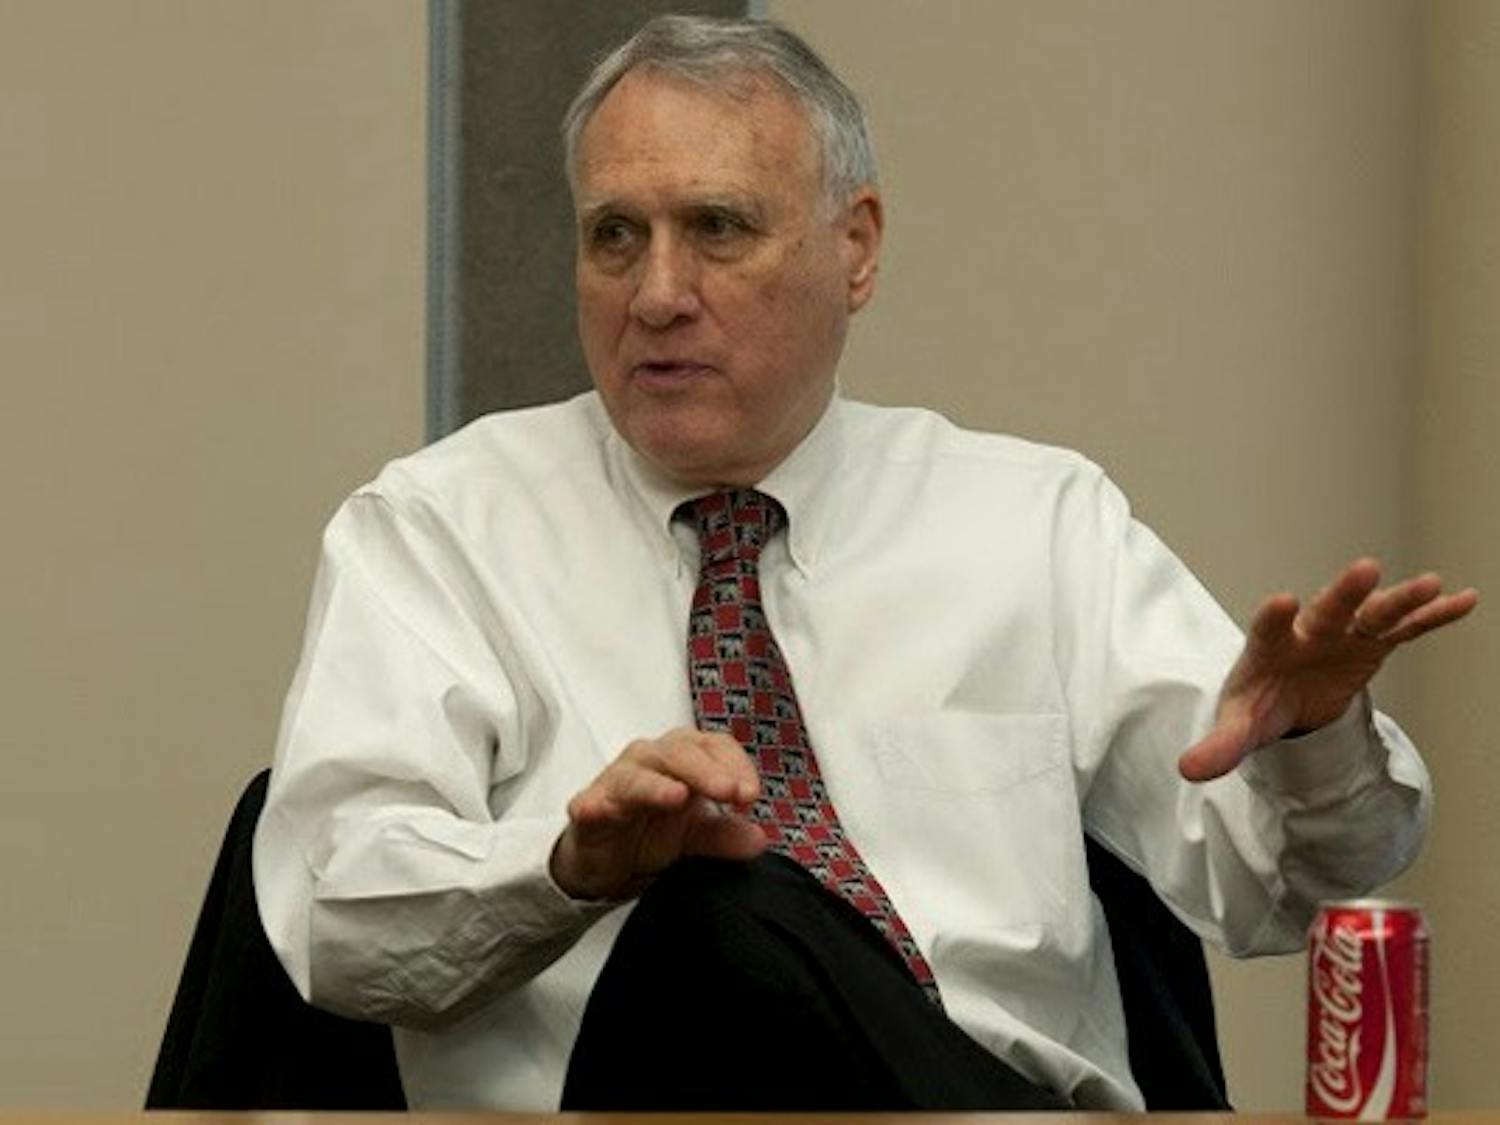 Republican Senator Jon Kyl informally meets with students and answers questions on Friday, Jan. 31 at the Barrett, the Honors College. The senators first topic addressed immigration. Kyl said he believes a compromise must occur in the house and suggests legalization opposed to full citizenship. (Photo by Mario Mendez)